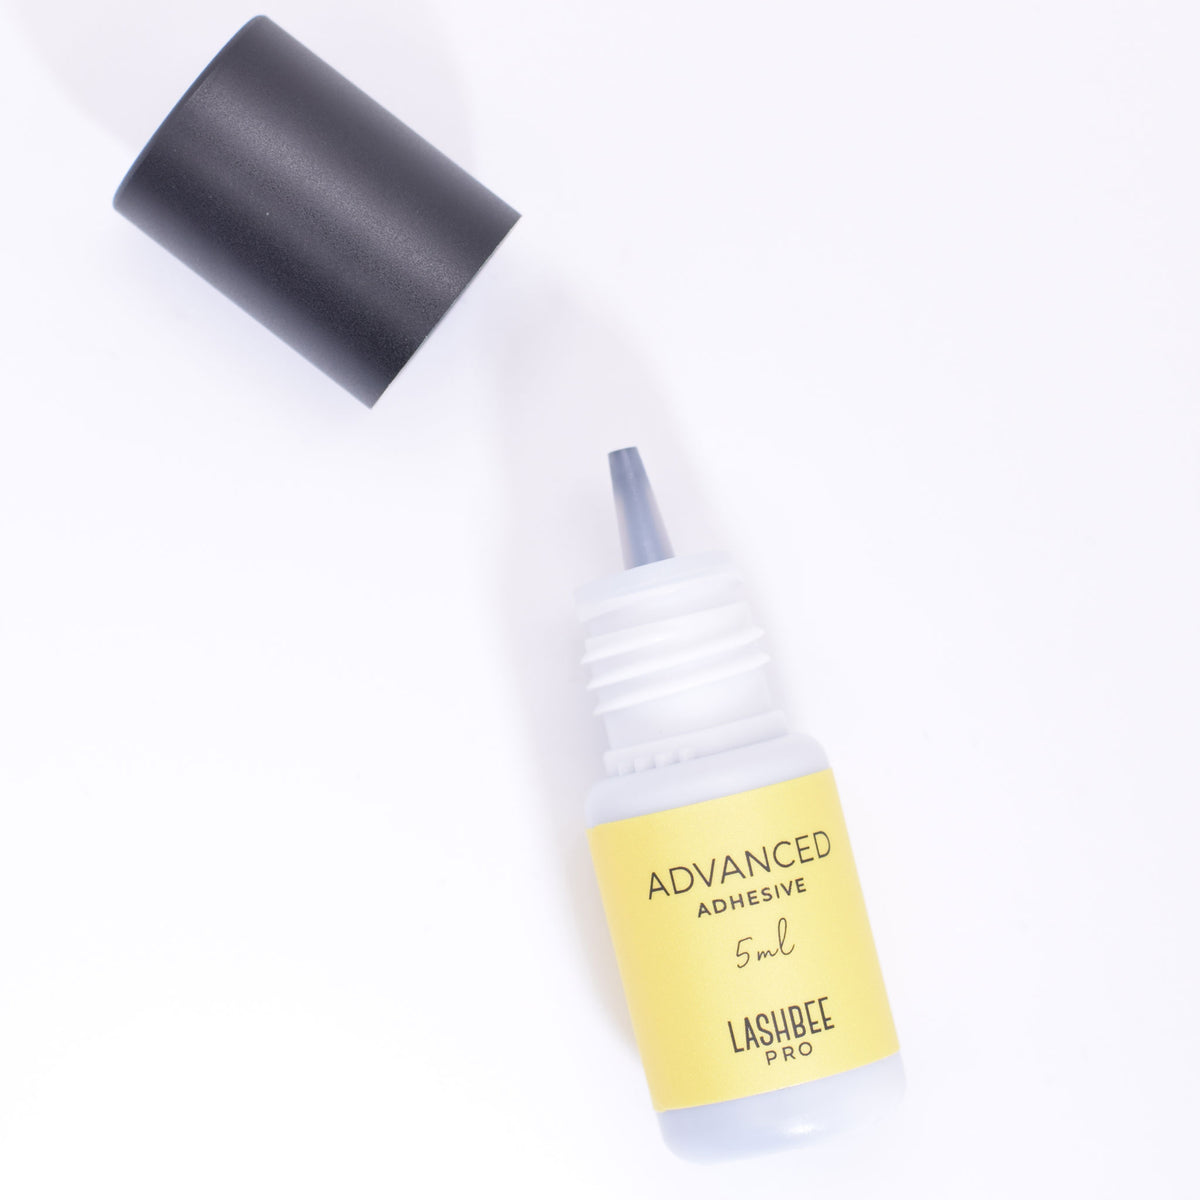 LashBeePro Advanced Adhesive for eyelash extensions - yellow bottle with the black cap off to show the bottle nozzle